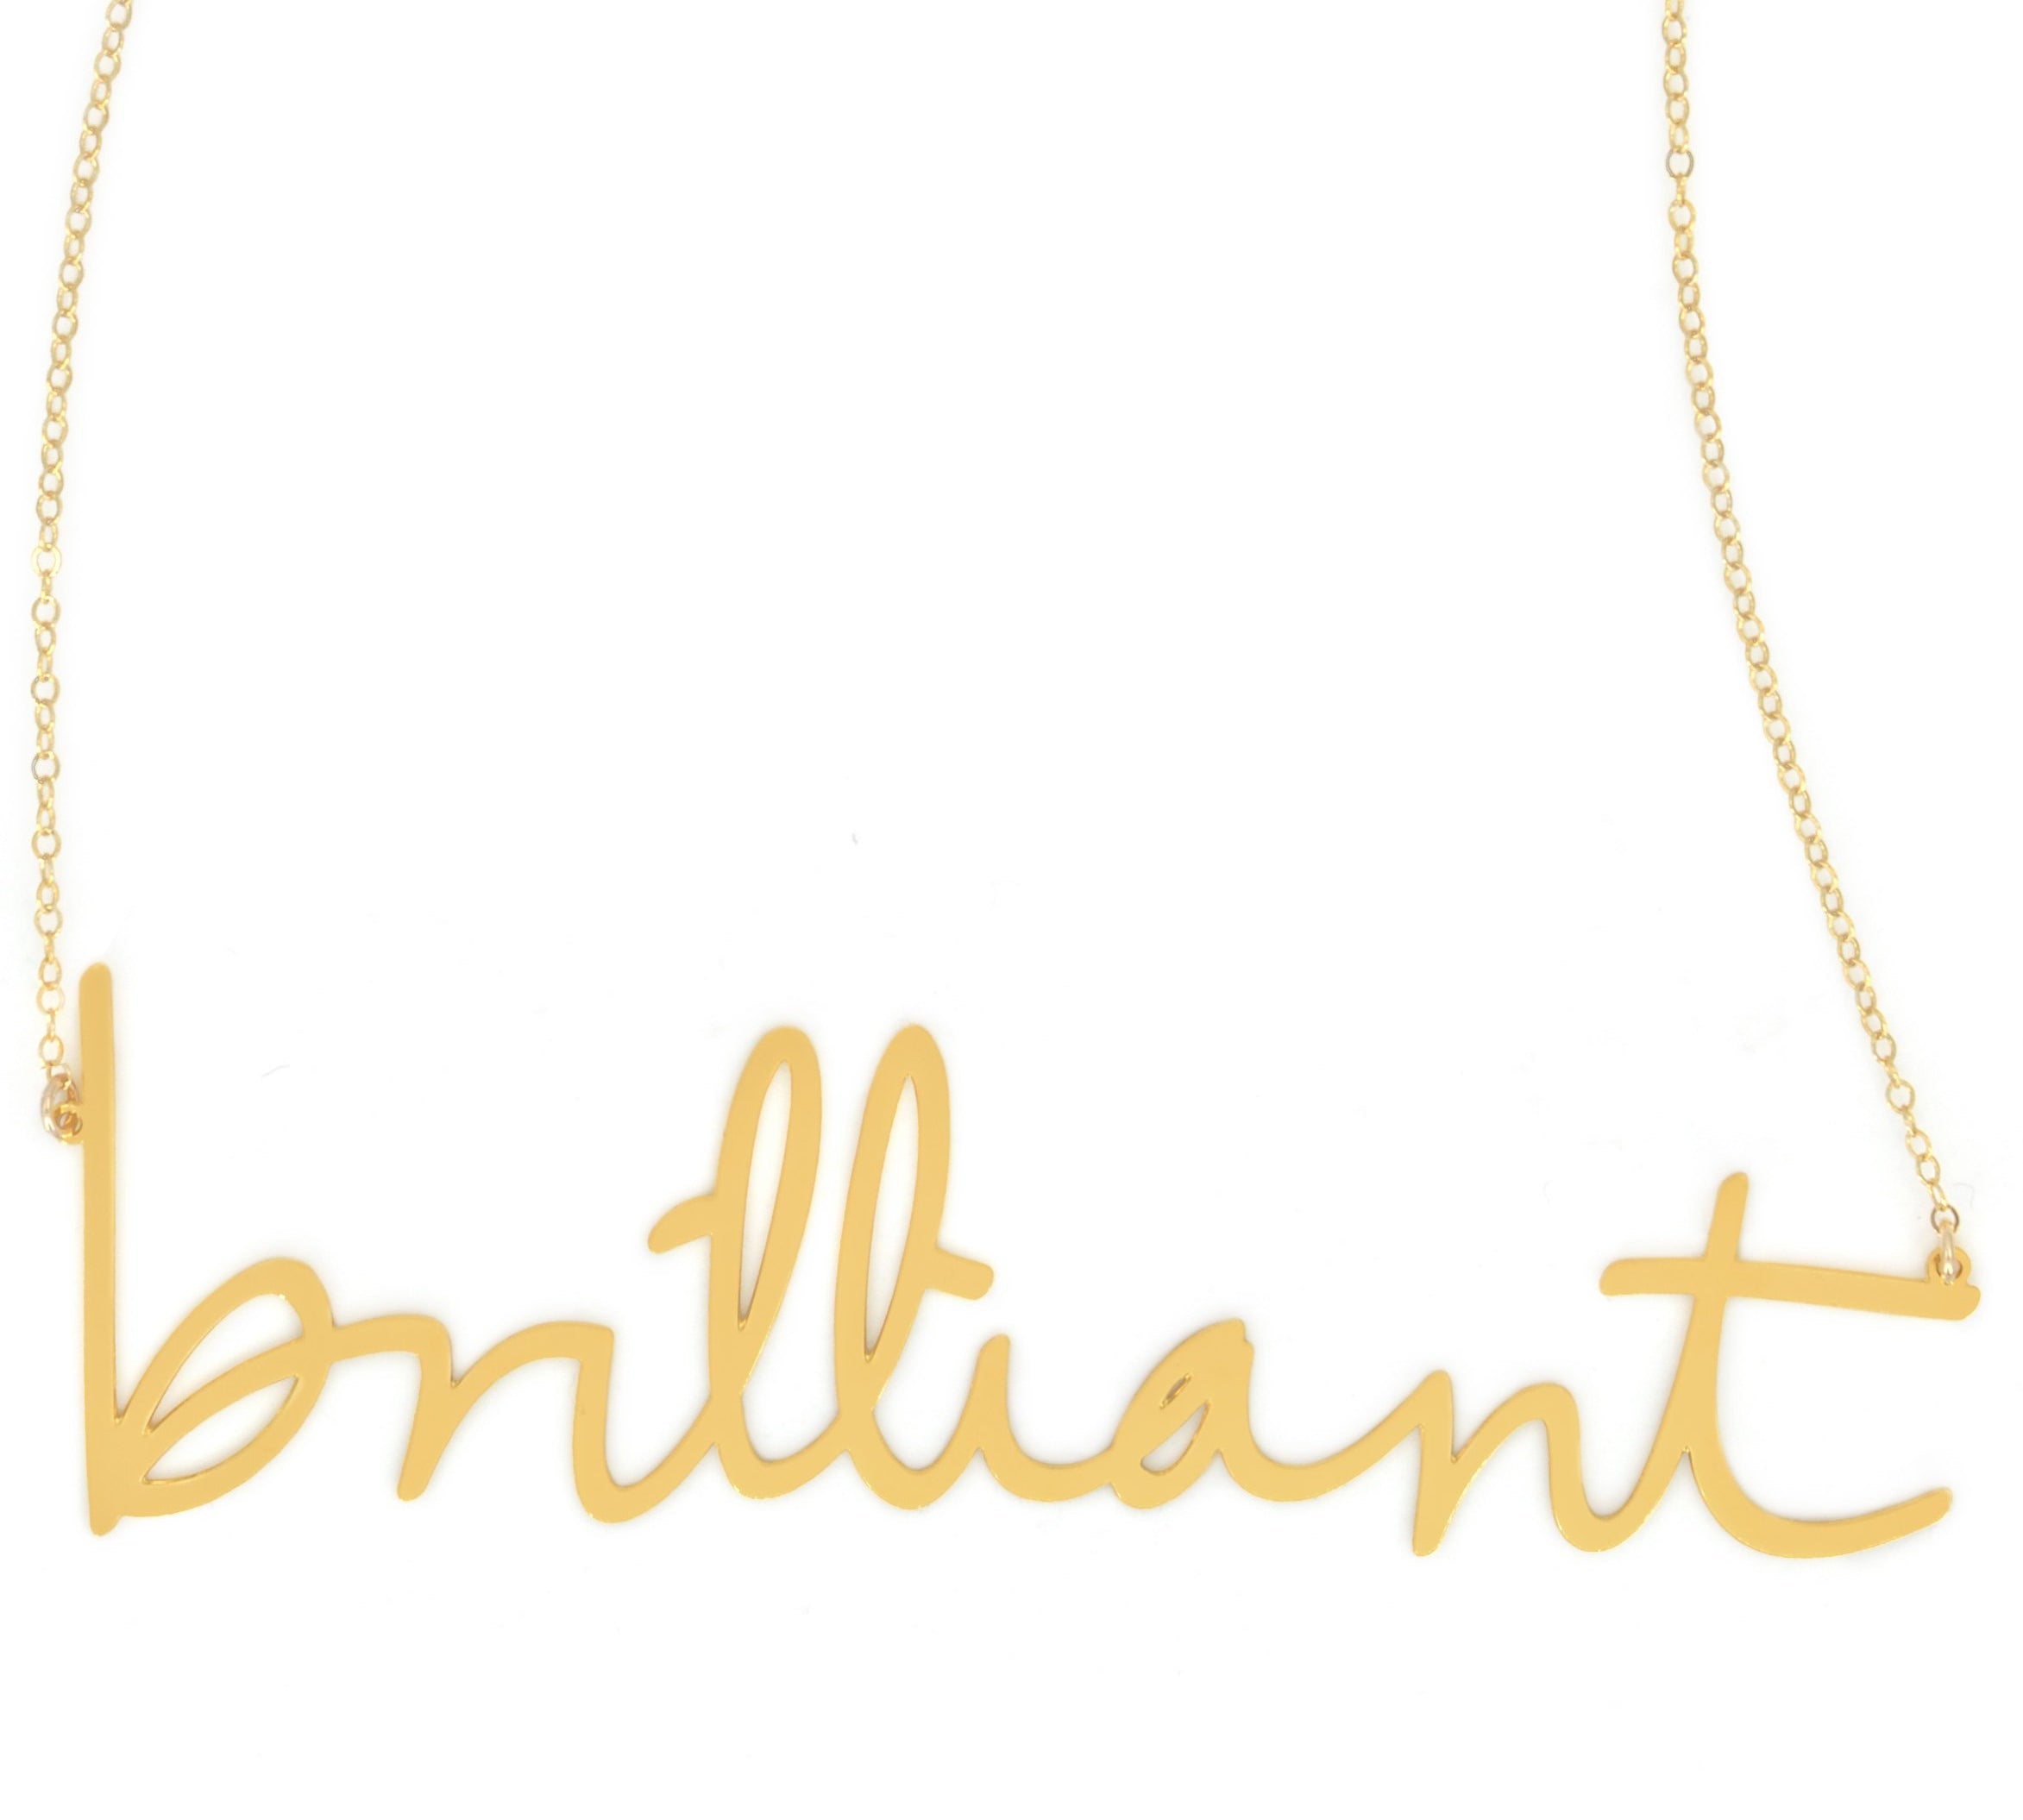 Brilliant Necklace - High Quality, Affordable, Hand Written, Empowering, Self Love, Mantra Word Necklace - Available in Gold and Silver - Small and Large Sizes - Made in USA - Brevity Jewelry